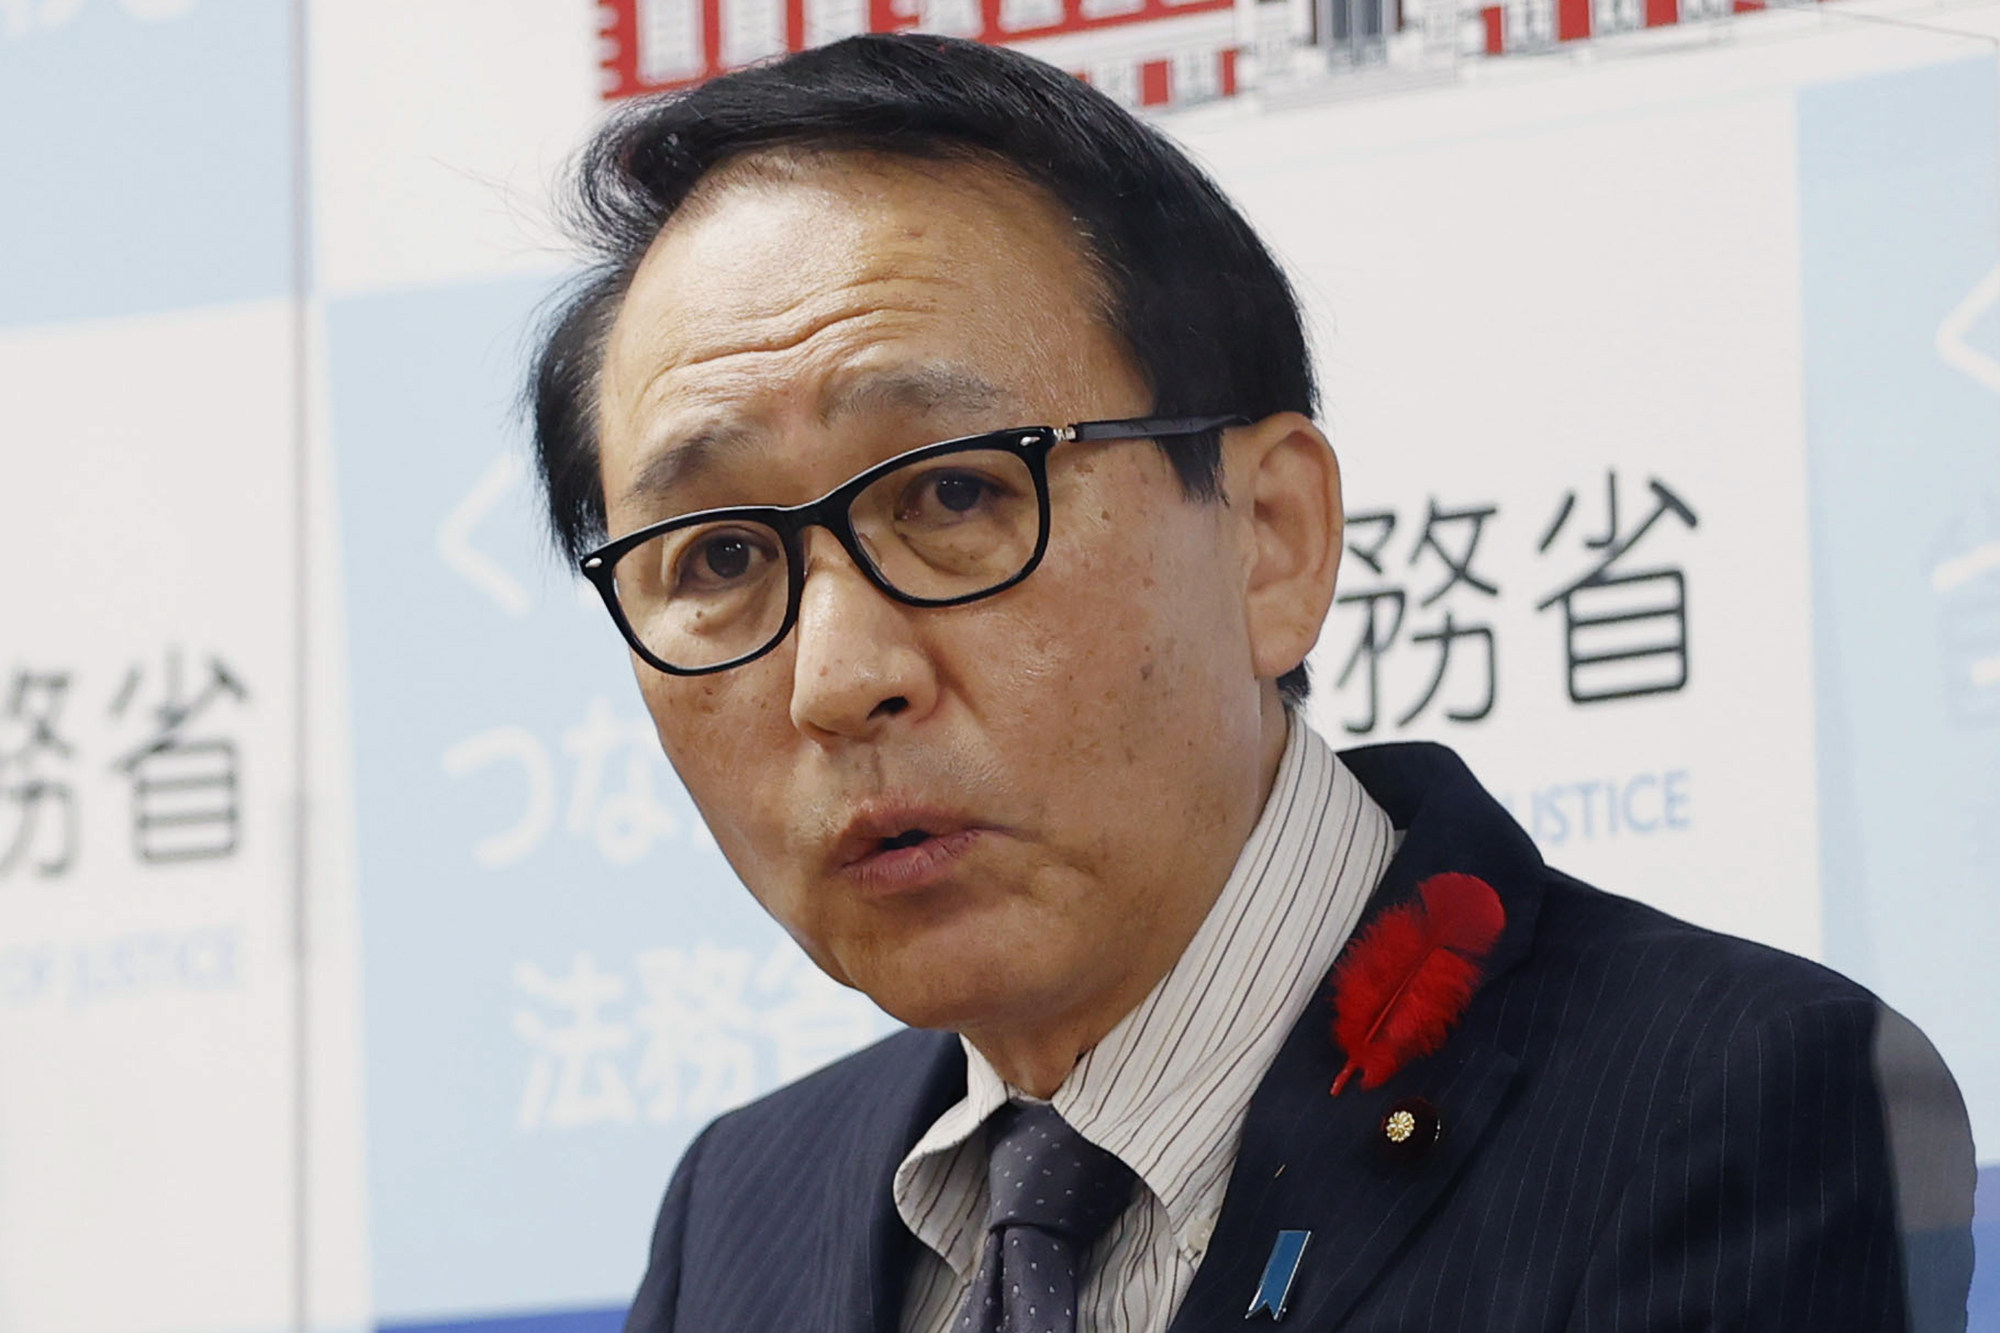 Japanese Justice Minister Yasuhiro Hanashi has resigned over his remark that his job makes news only when he signs executions. Photo: AP